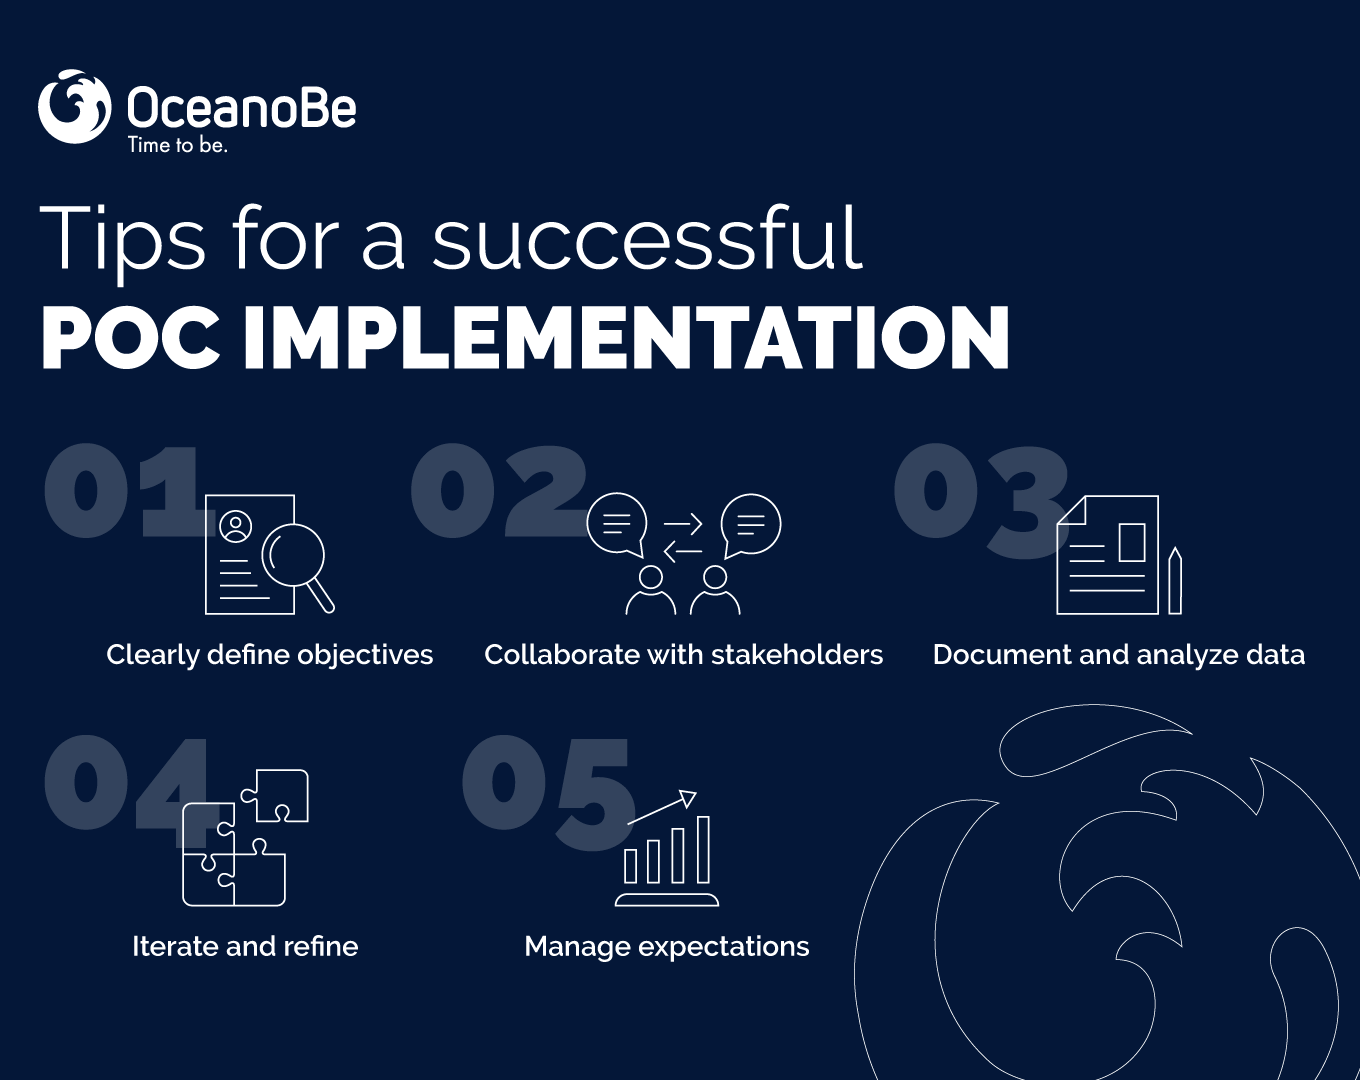 tips-for-a-successful-POC-implementation